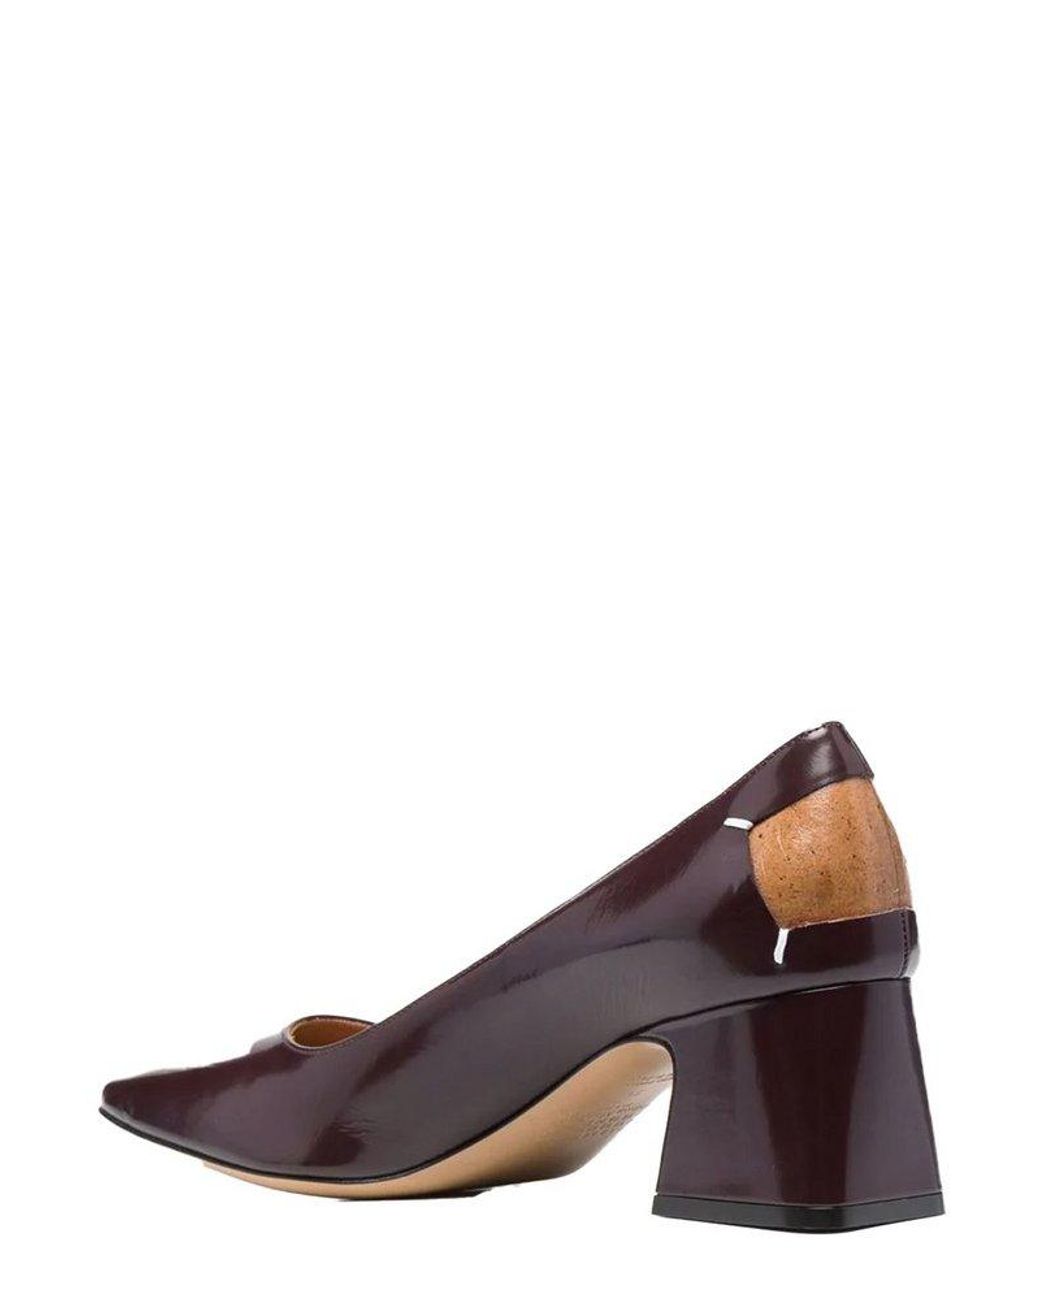 Shop Honora Brown Tuscany Leather Low Heel Pumps